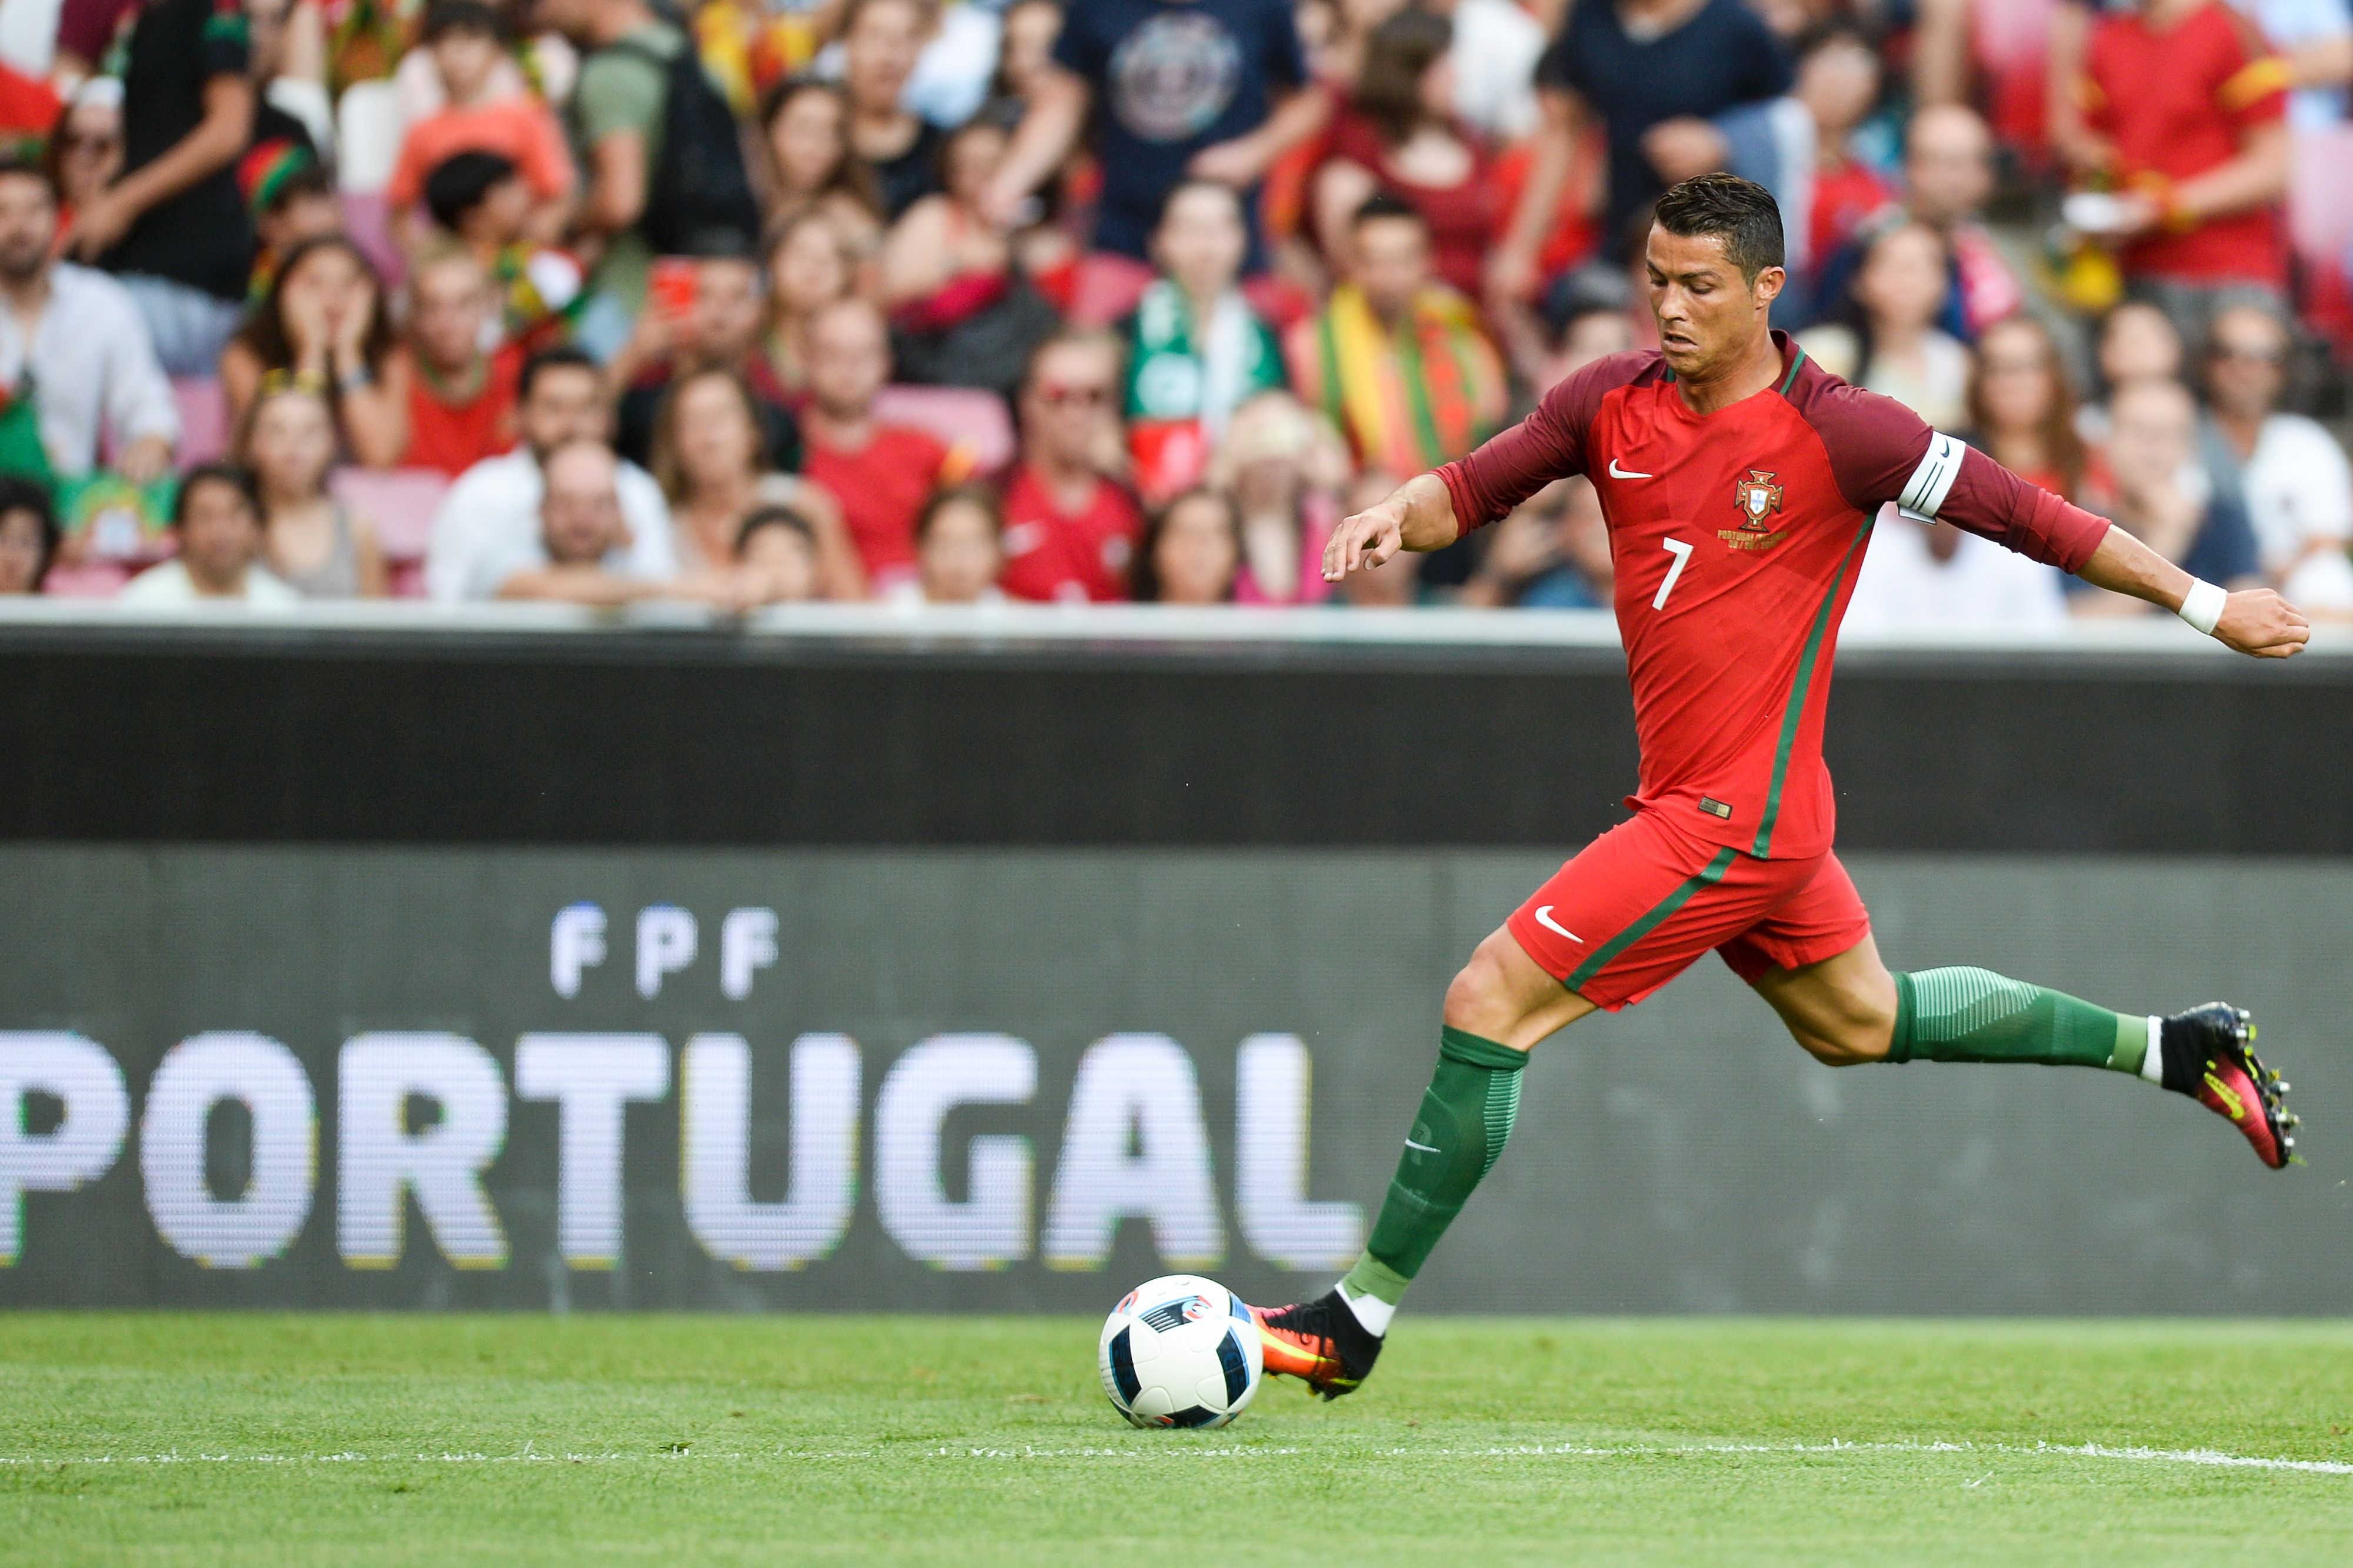 Portugal's forward Cristiano Ronaldo controls the ball during the friendly football match Portugal vs Estonia at Luz stadium in Lisbon on June 8, 2016, in preparation for the upcoming UEFA Euro 2016 Championship. / AFP / PATRICIA DE MELO MOREIRA        (Photo credit should read PATRICIA DE MELO MOREIRA/AFP/Getty Images)